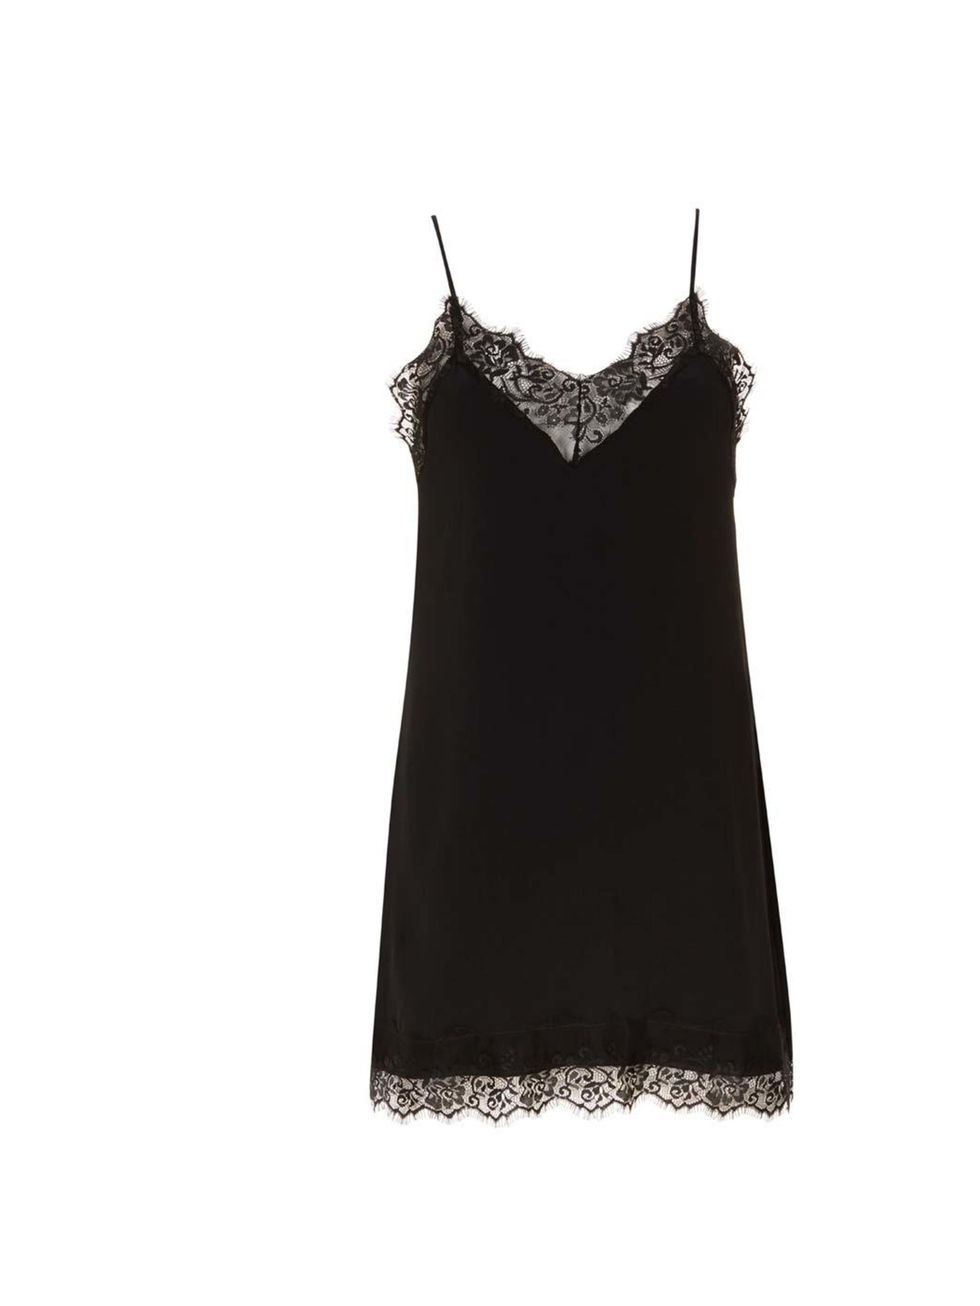 <p>Release your inner Courtney Love in this black camisole dress - as worn by Art Intern Eilidh Williamson.</p><p><a href="http://www.ohmylove.co.uk/collections/dresses/products/sweet-dreams-black-lace-trim-camisole-dress">Oh My Love</a> dress, £35</p>